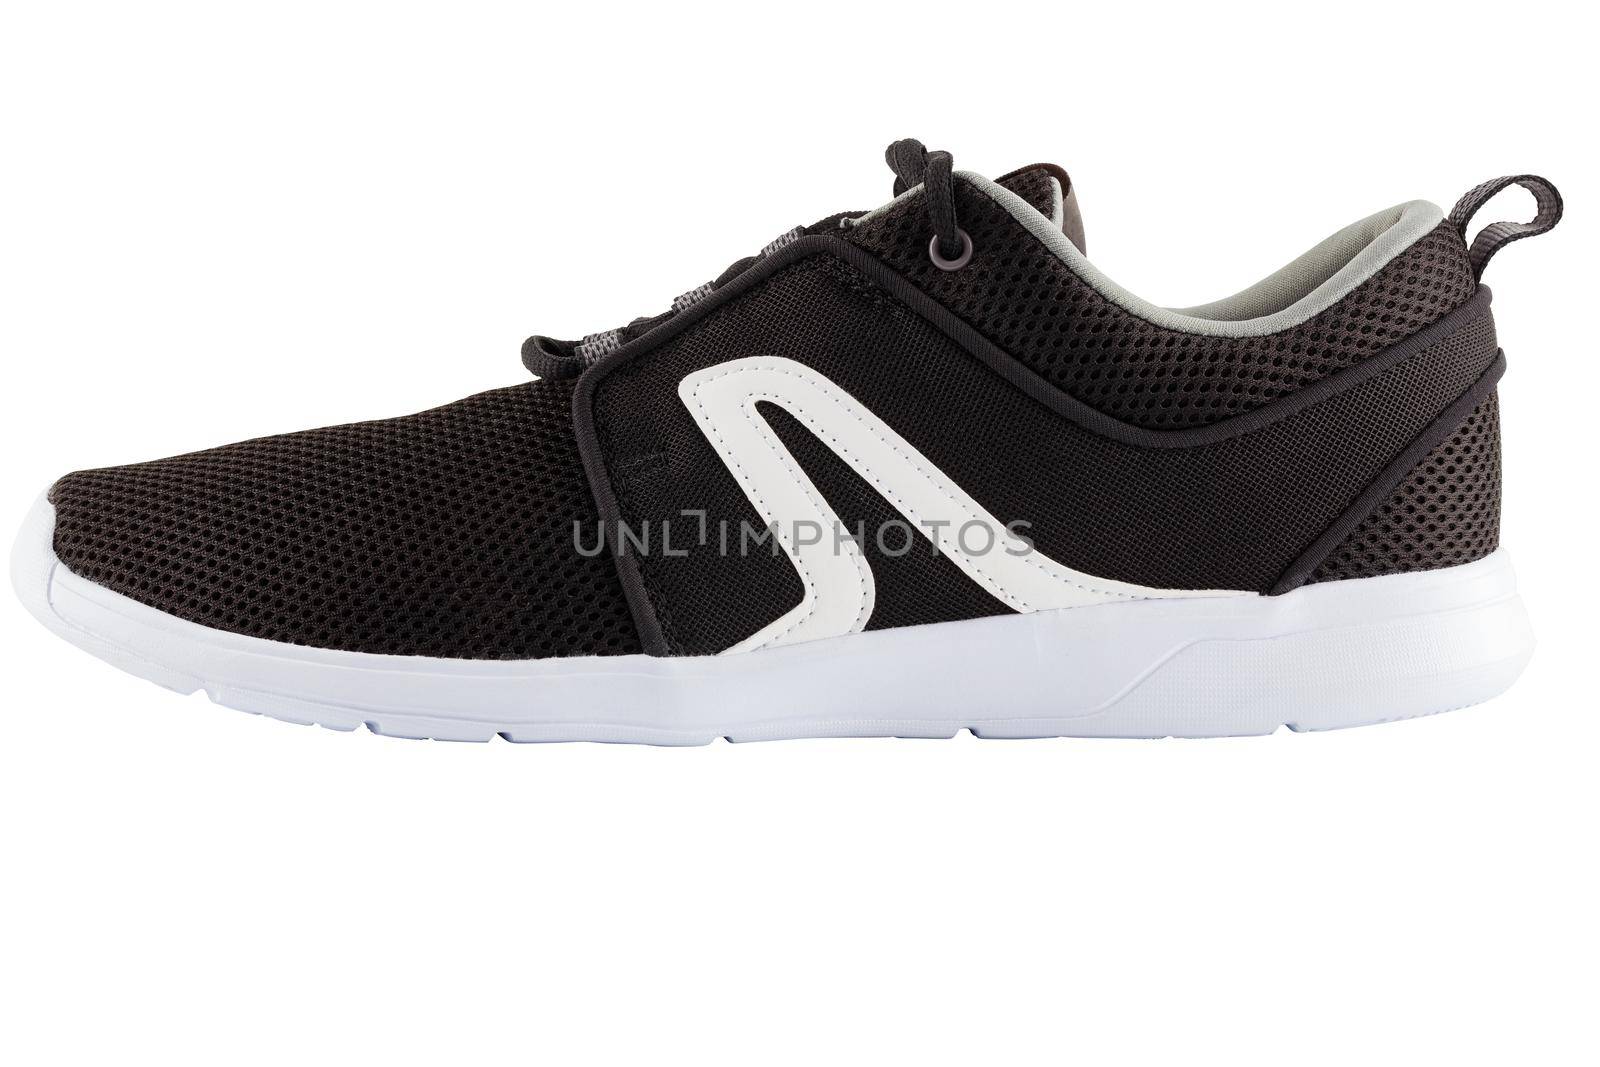 black airmesh summer walking lightweight shoe isolated on white background, side view